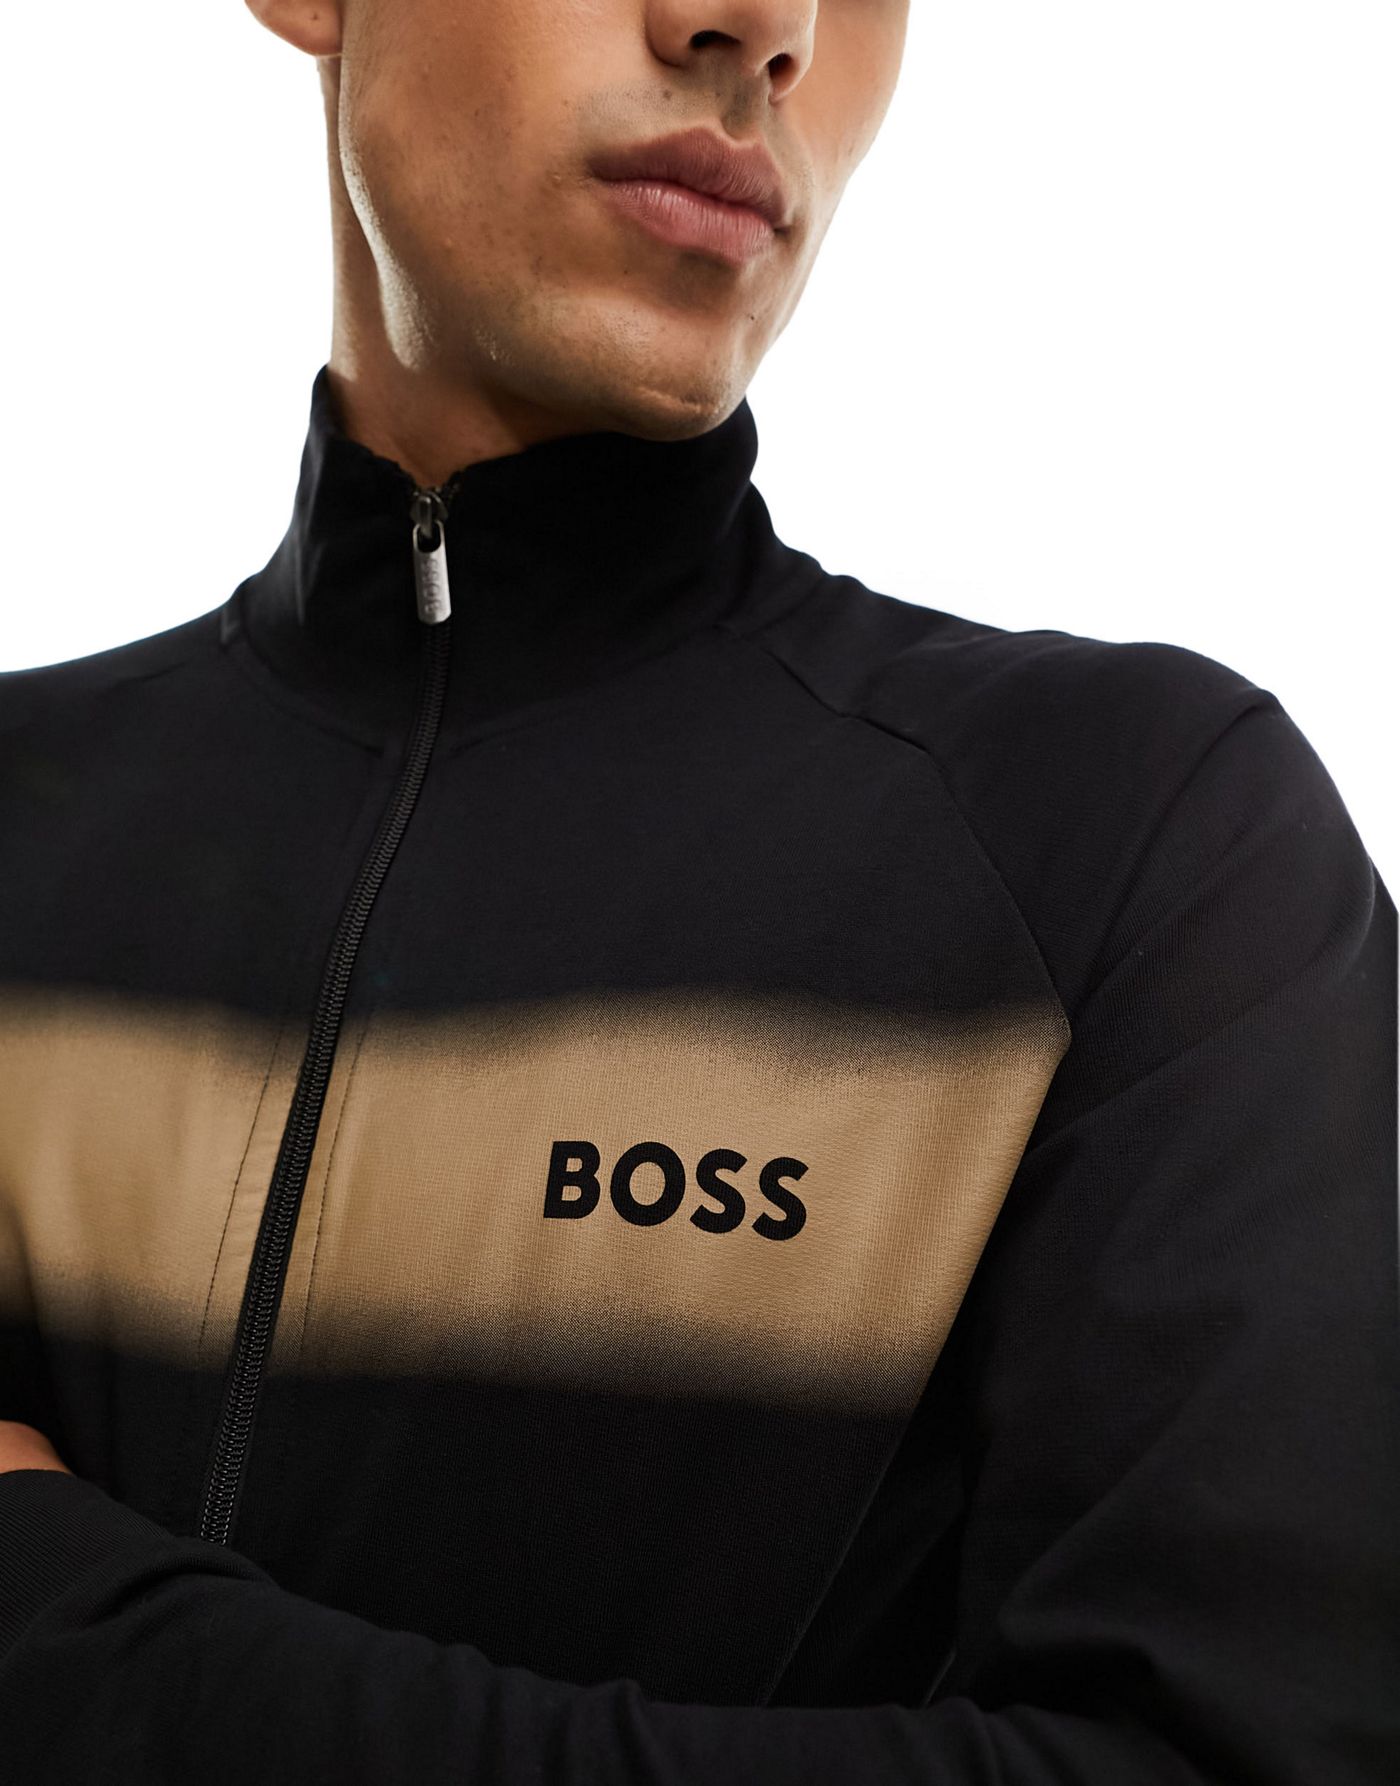 Boss Bodywear authentic zip jacket with printed logo in black